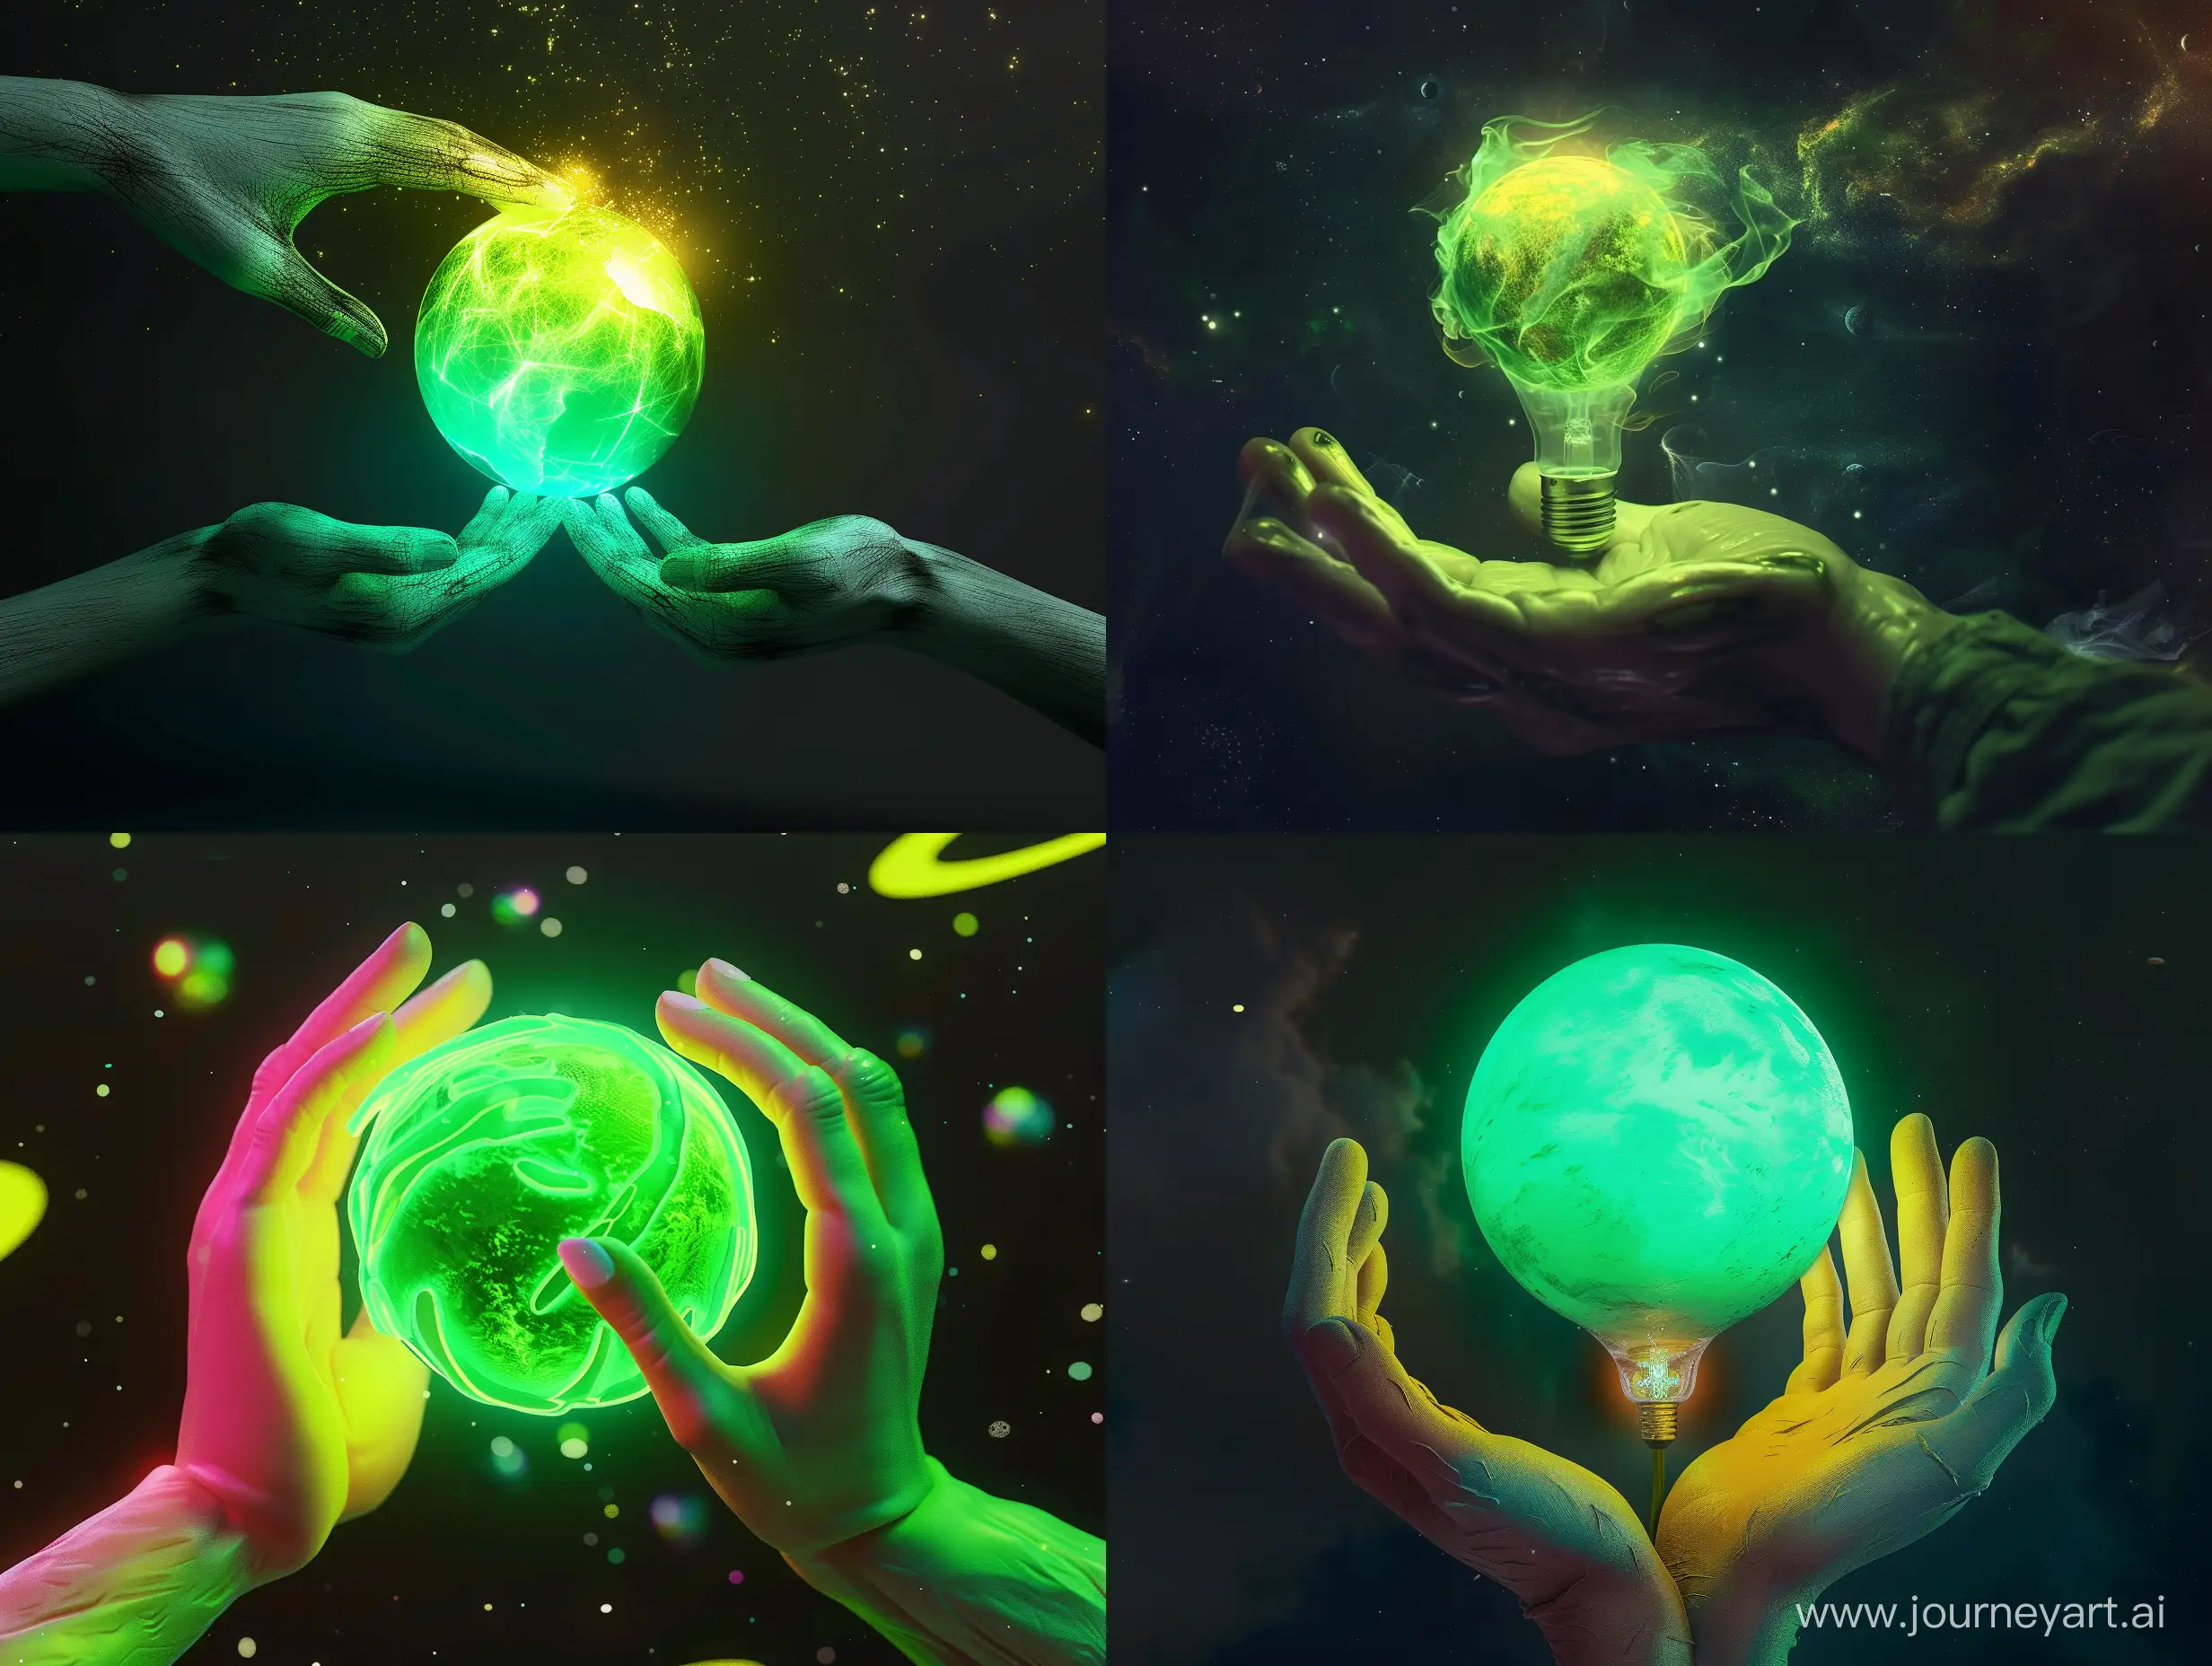 high quality with perfect detailed create A real advertising scene from an idea between magical beauty hands protect and support the idea like a Phosphor green planet on an orbit this should be an Advertising picture with black space or galaxy background  colorful, neon, light is main color  use marketing, strategies, brand identity, development, orbit, idea, Lamp, wave, hands as subject  create an 3D image with highest quality negative prompt: Disfigured, cartoon, blurry